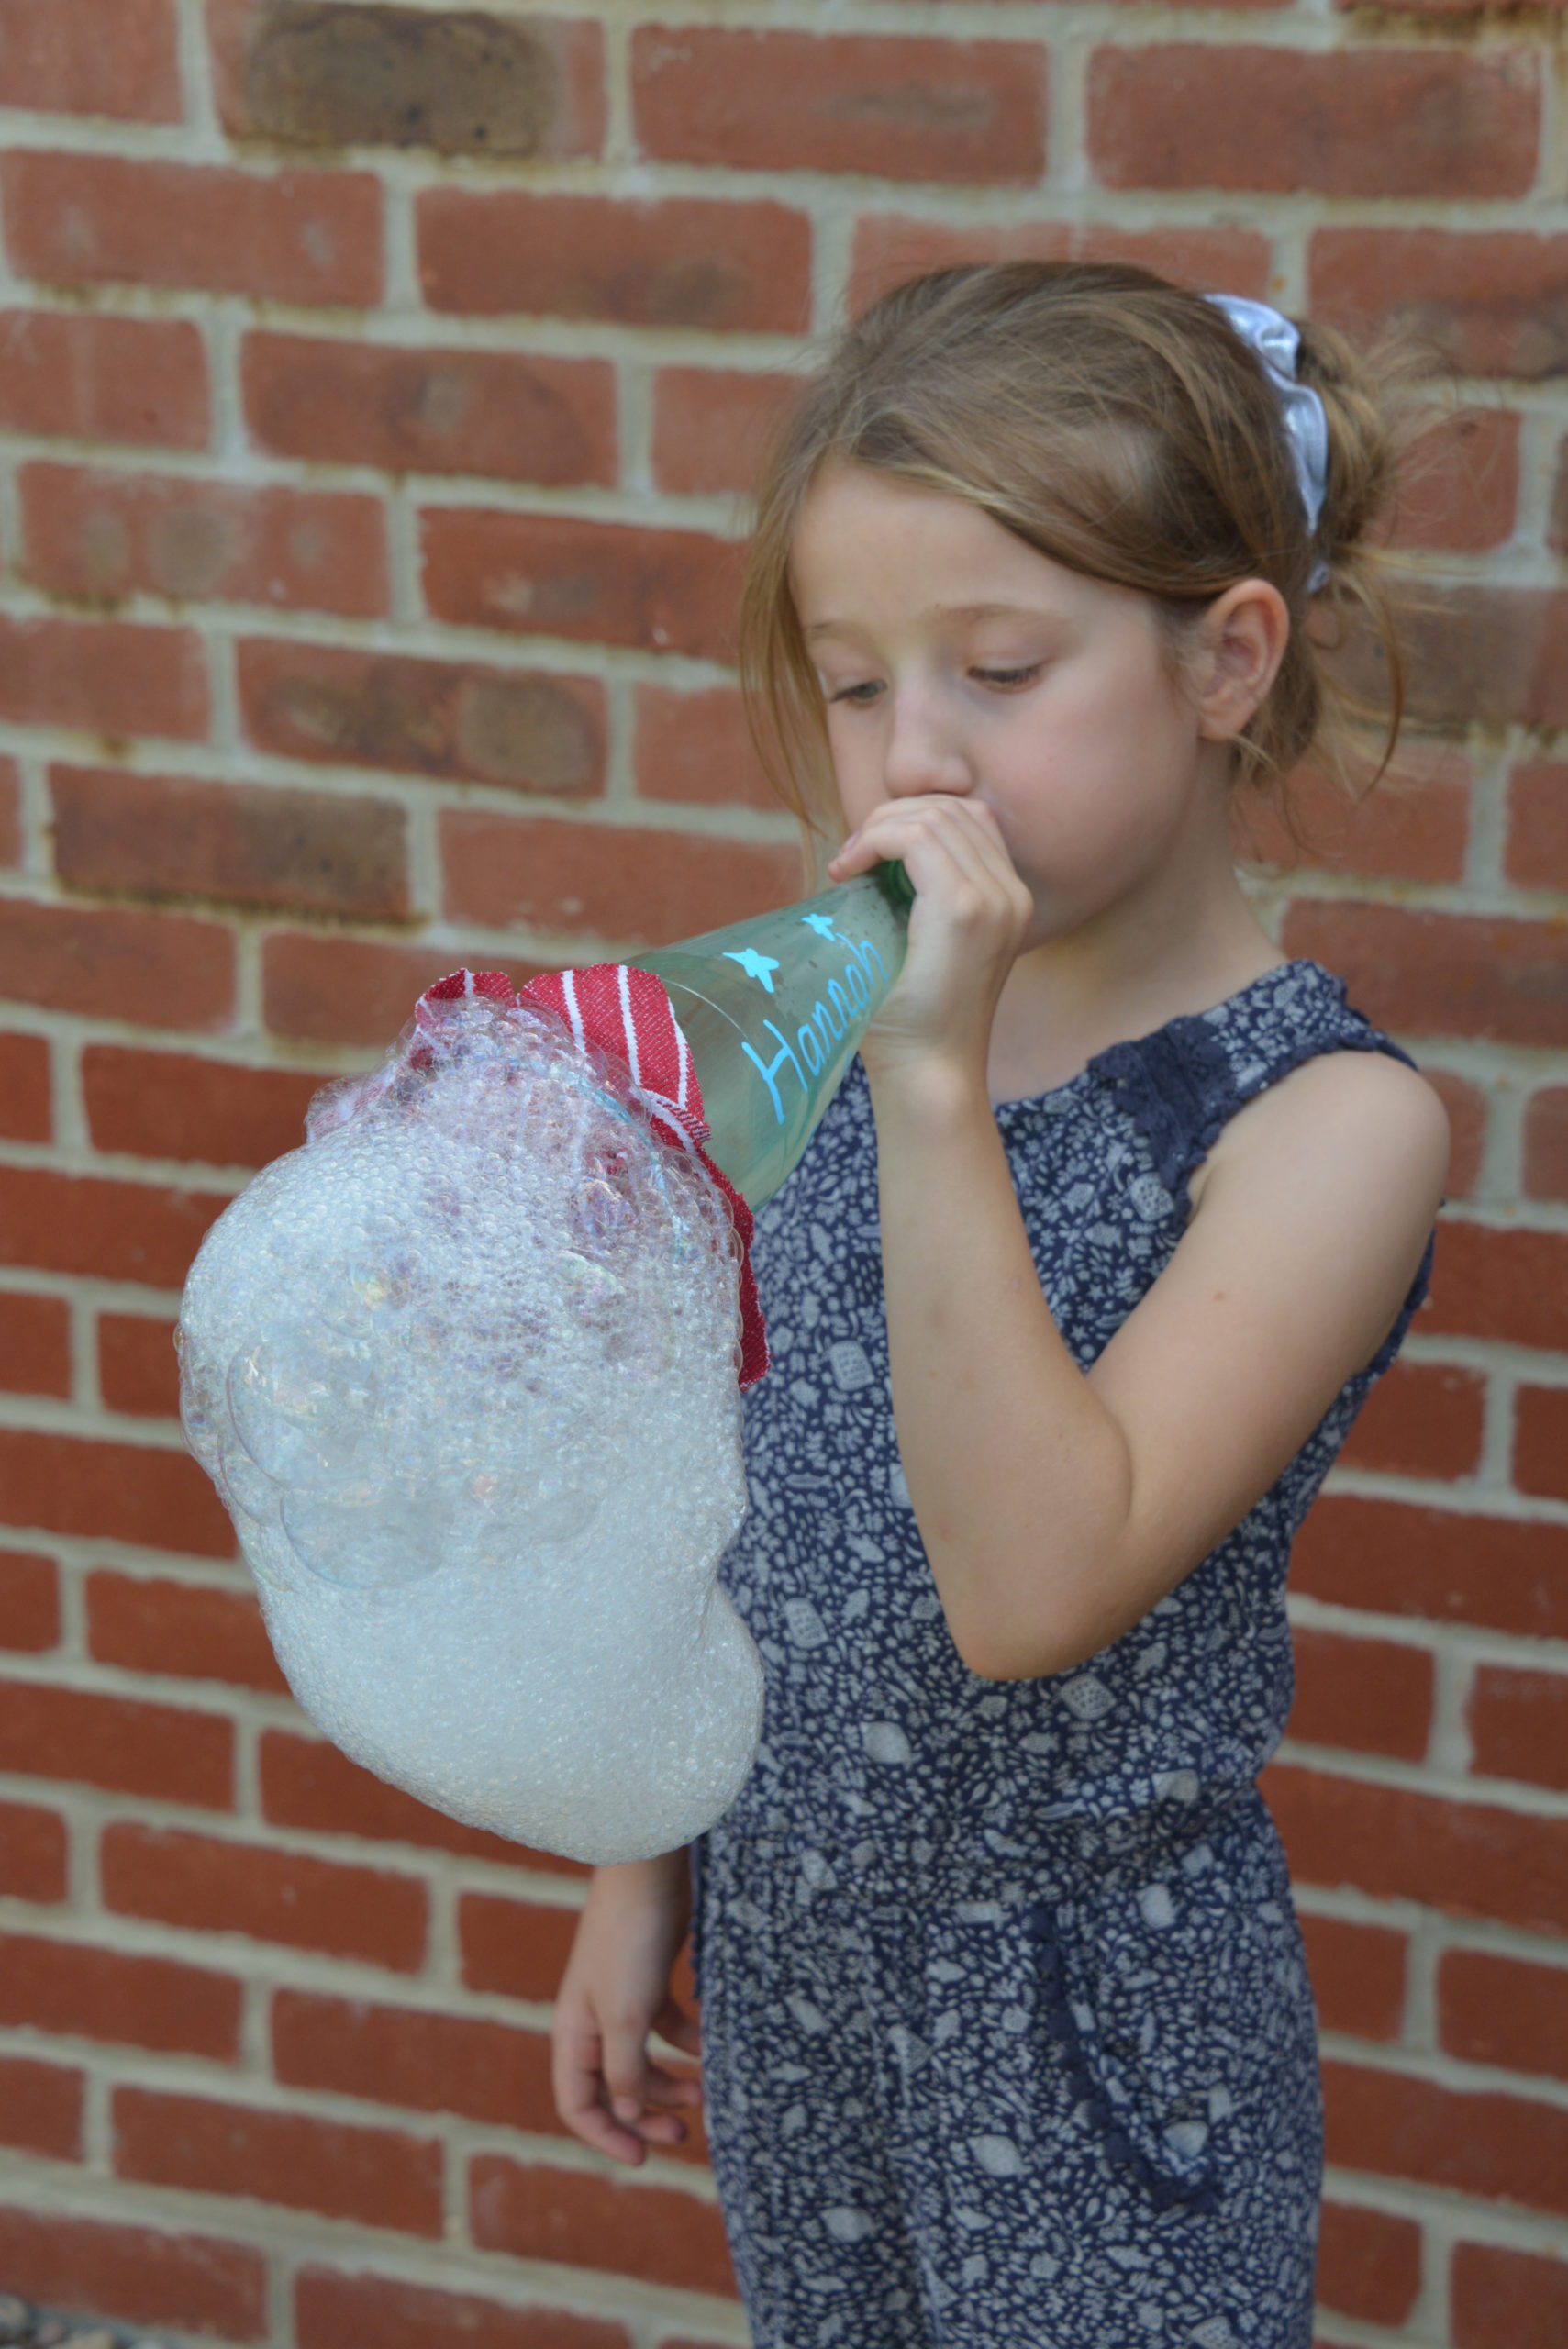 Blowing bubbles for science